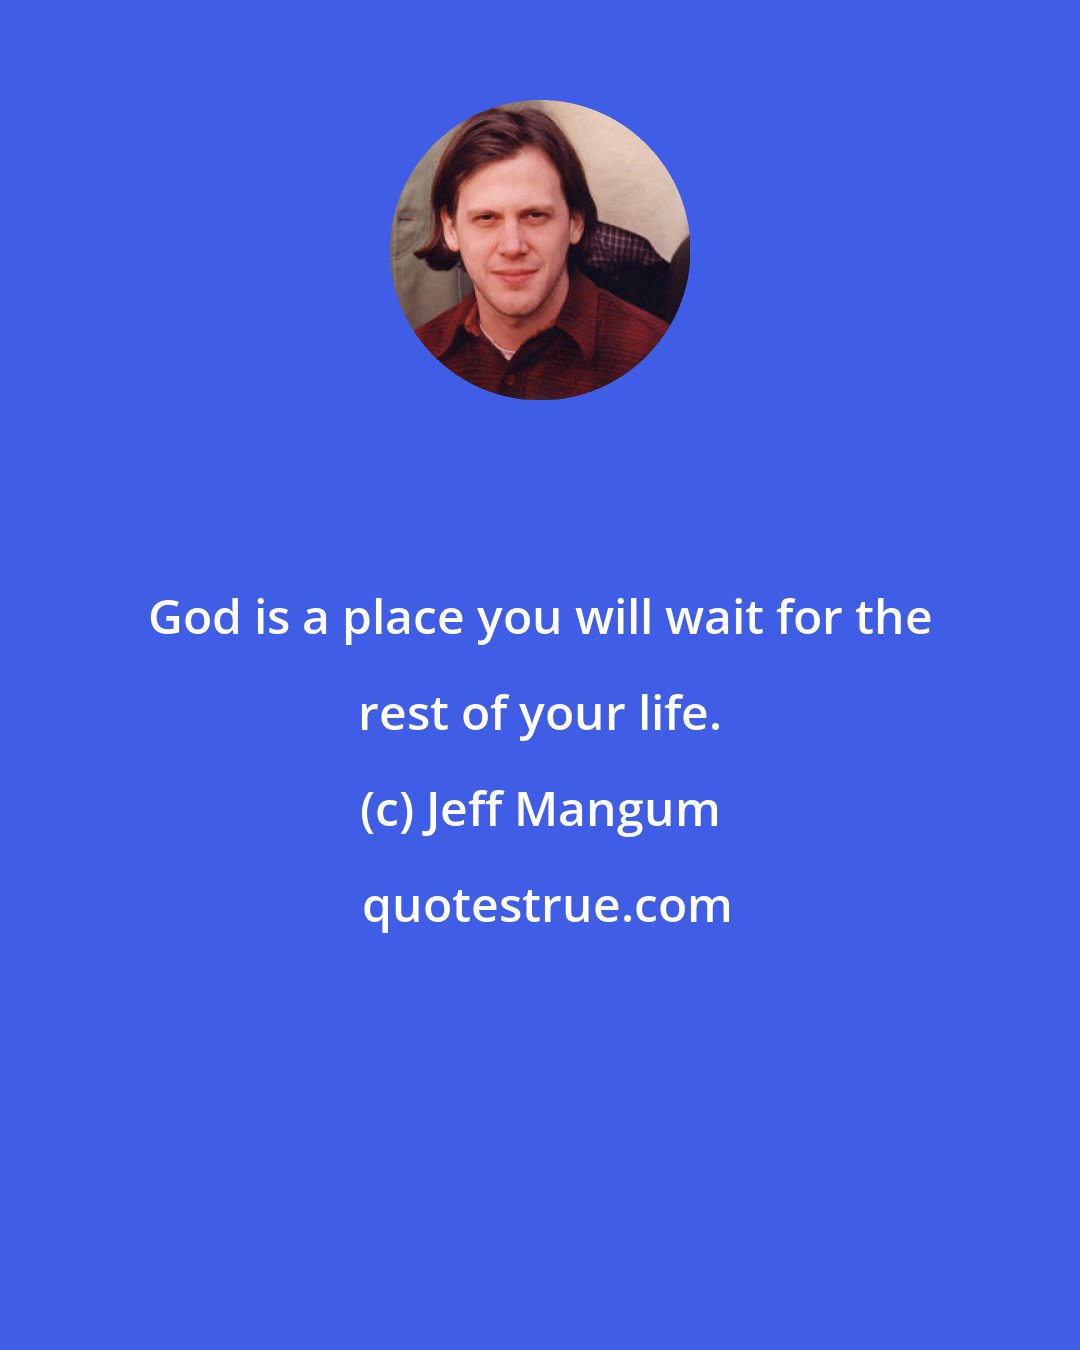 Jeff Mangum: God is a place you will wait for the rest of your life.